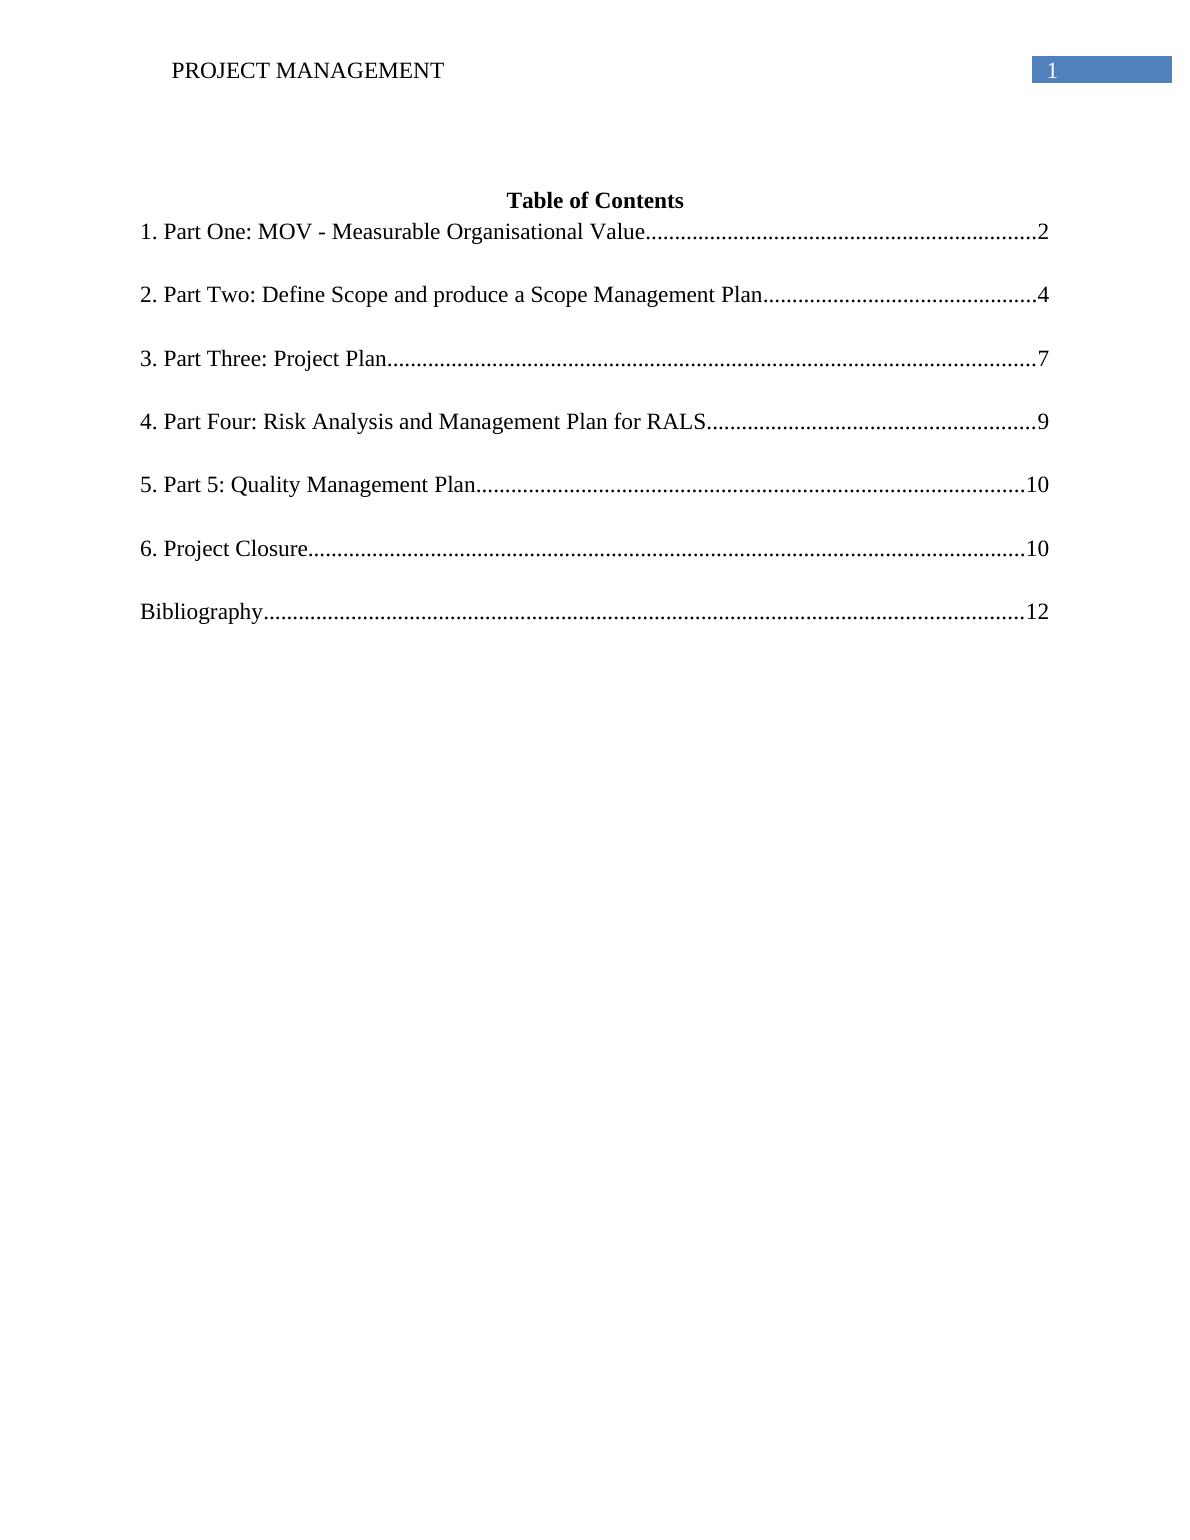 Assignment on Project Management PDF_2